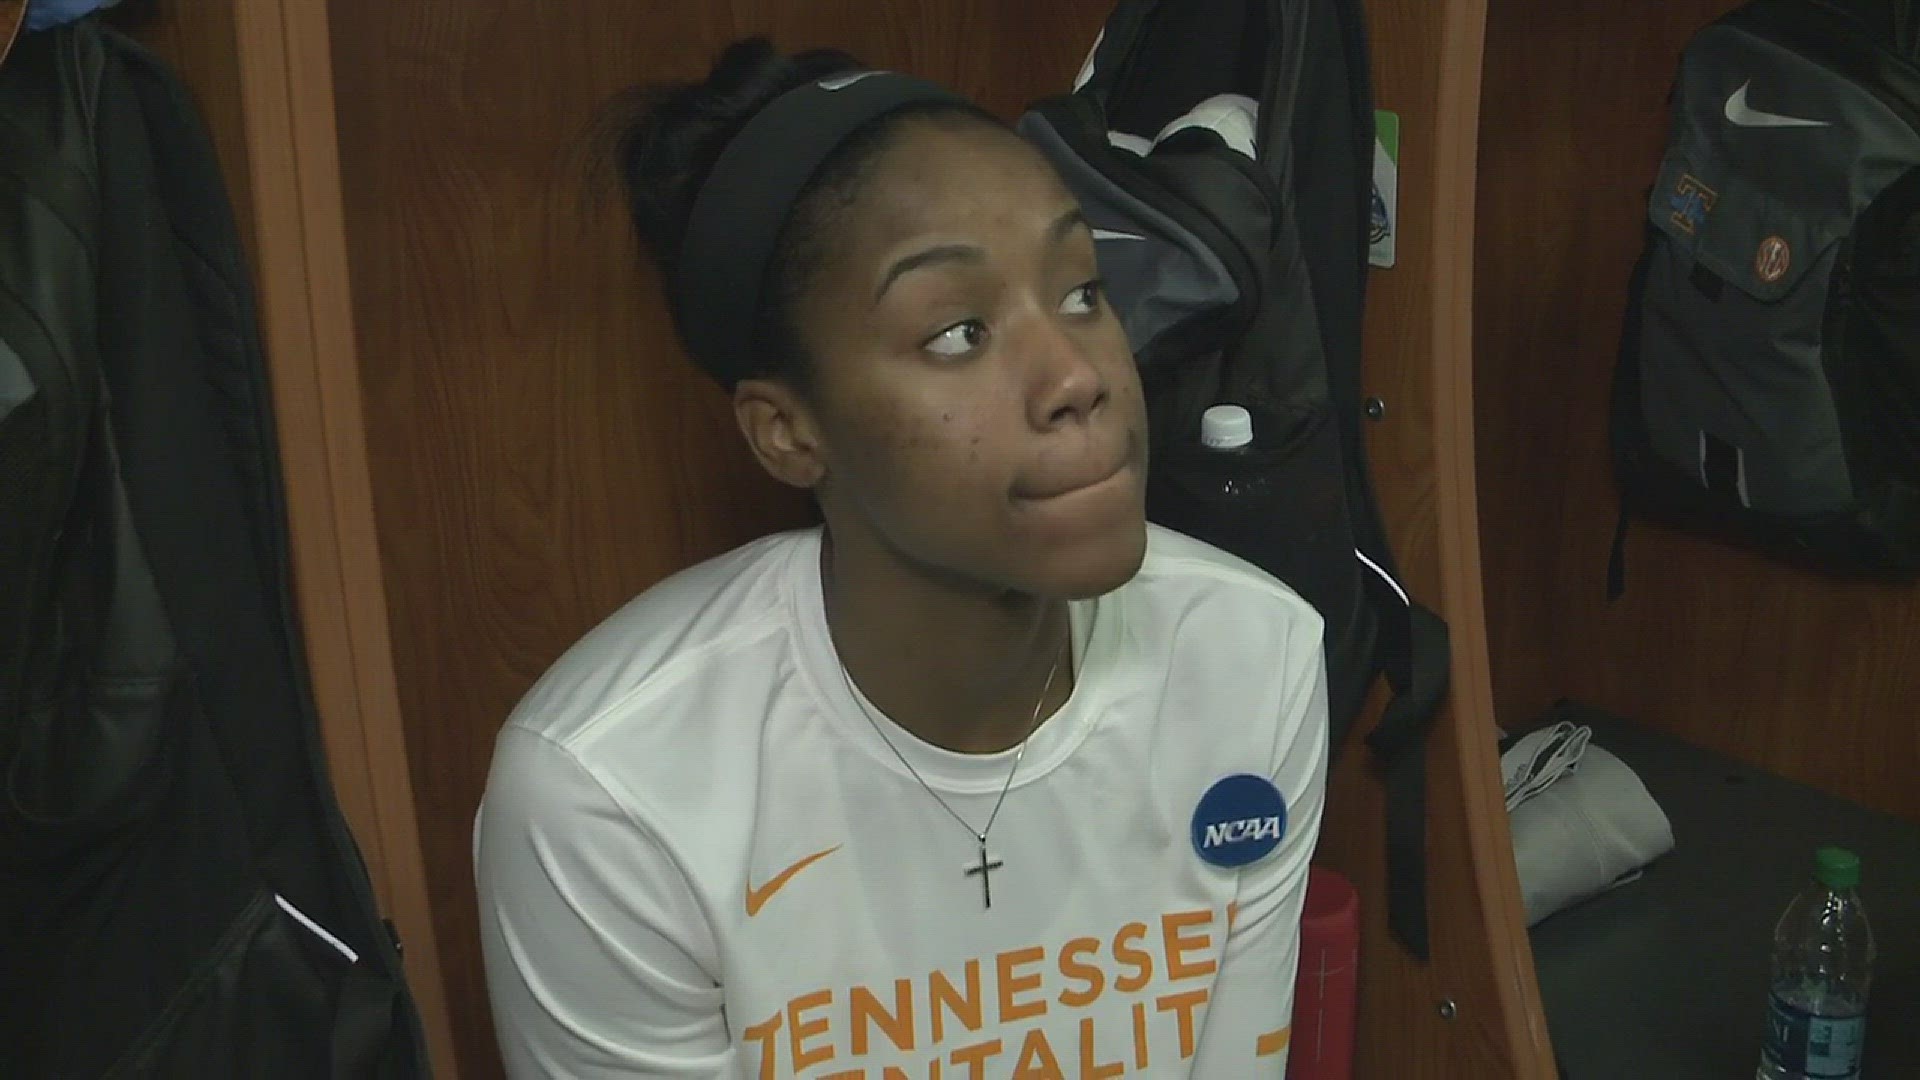 Senior Jordan Reynolds offers her thoughts on Tennessee's win over Dayton on Saturday.